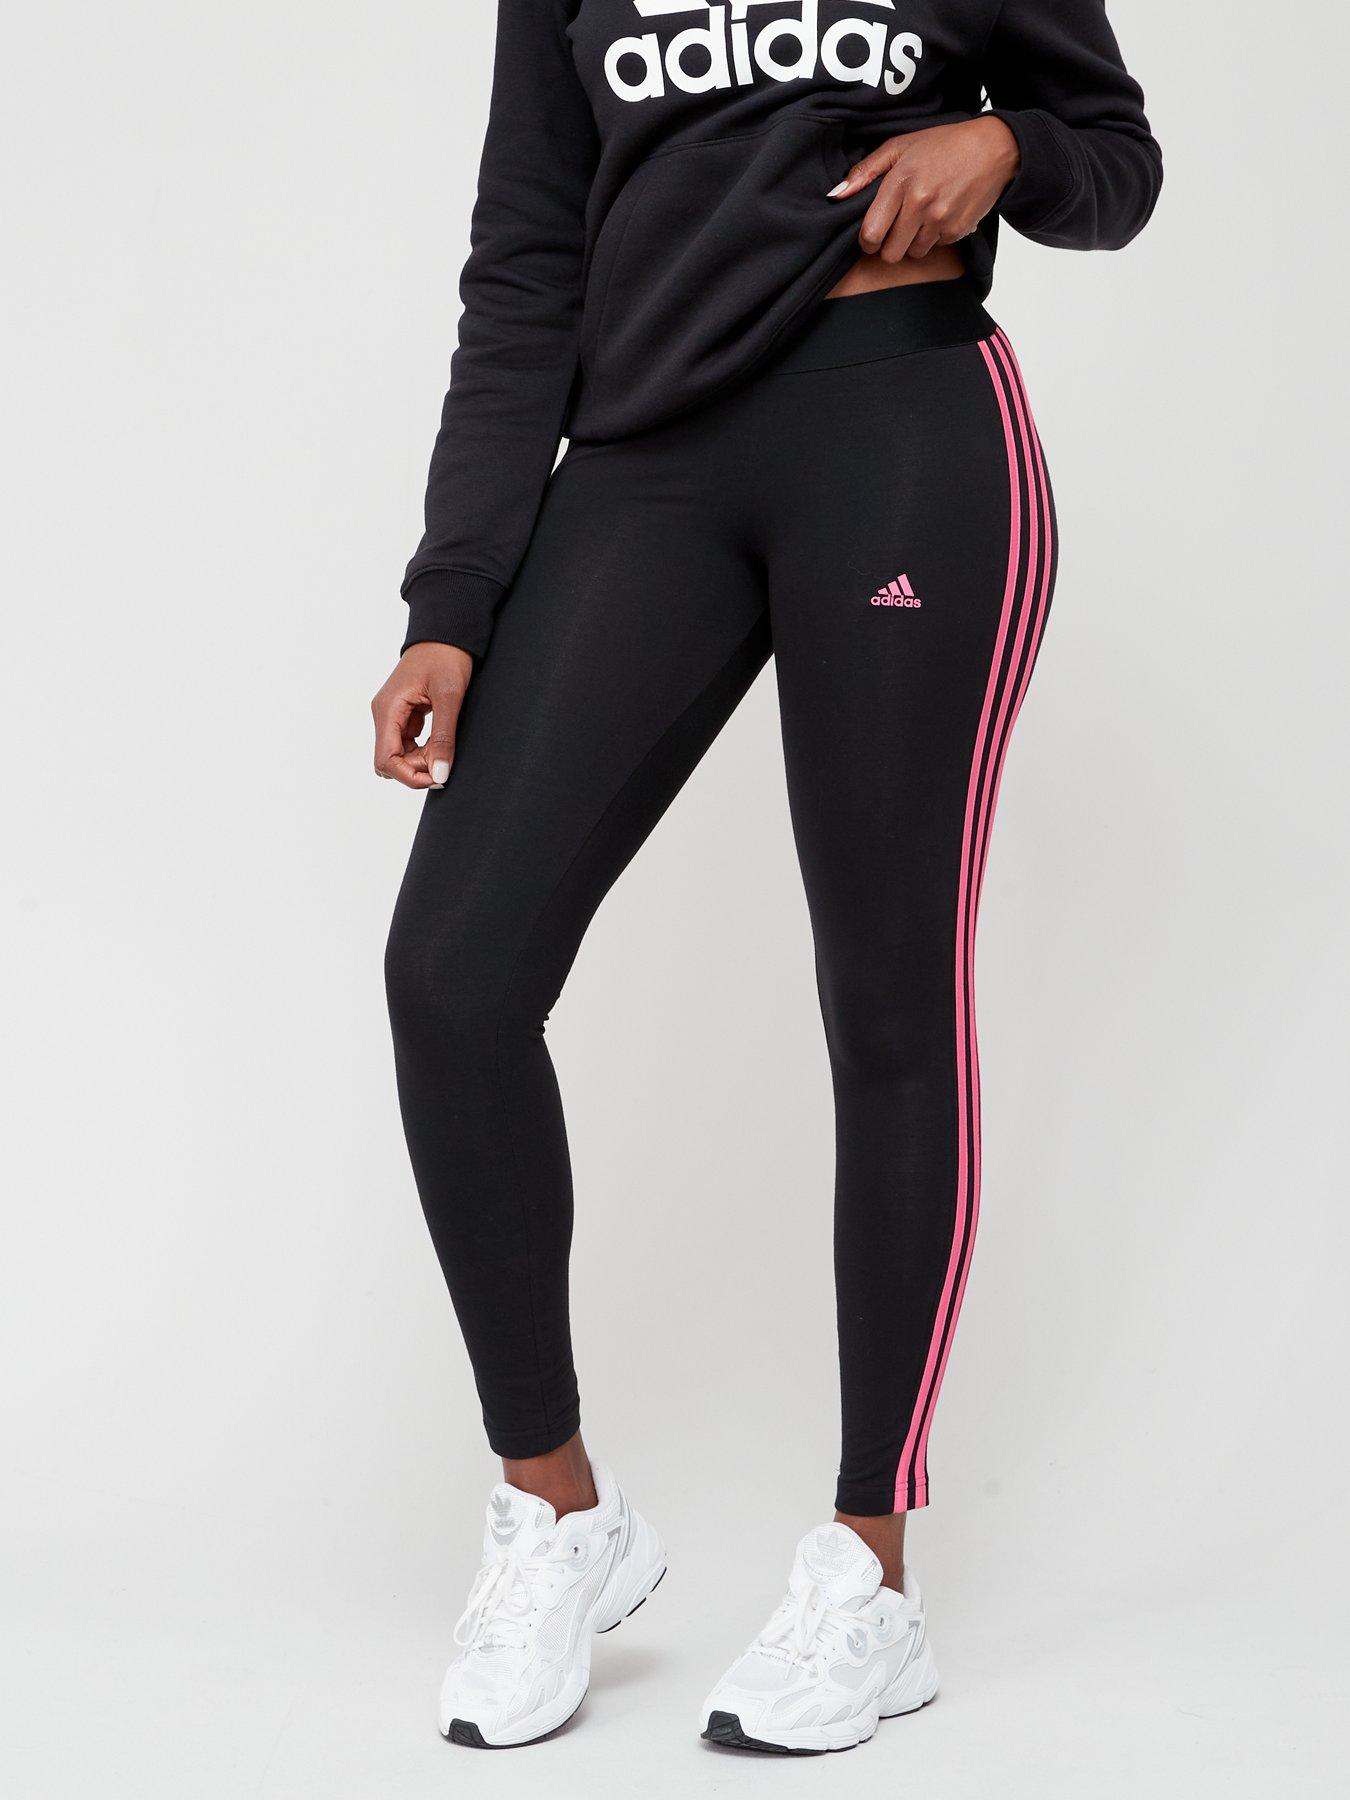 ADIDAS Climalite 3-Stripes 3/4 Sport Tights  Leggings, Women's Fashion,  Activewear on Carousell